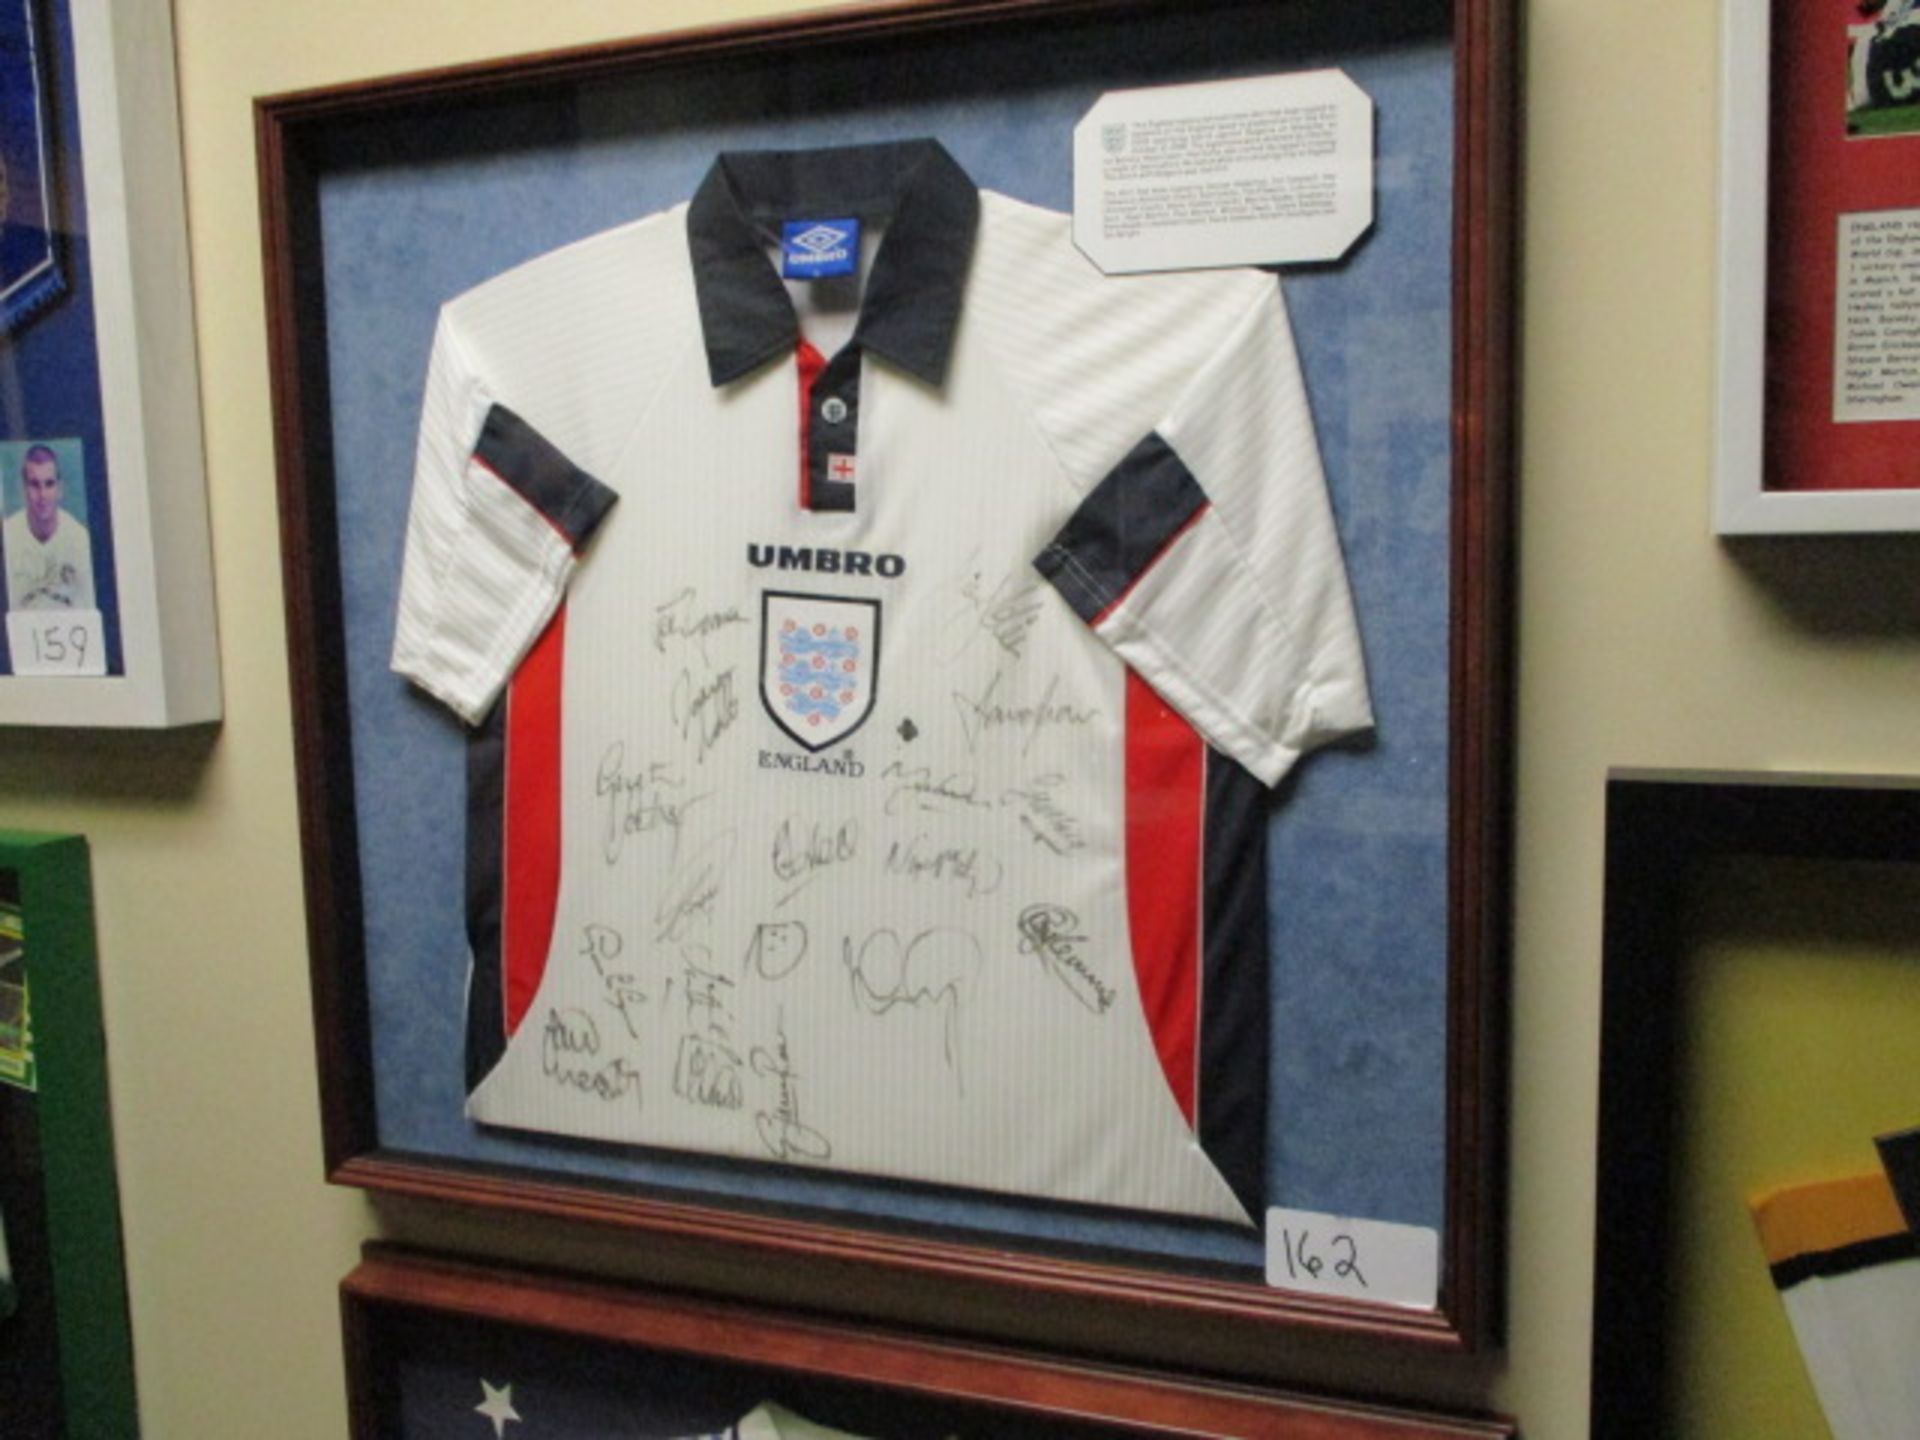 England National team signed replica jersey for Euro 2000 Euro qualifying game versus Bulgaria (Oct, - Image 2 of 3